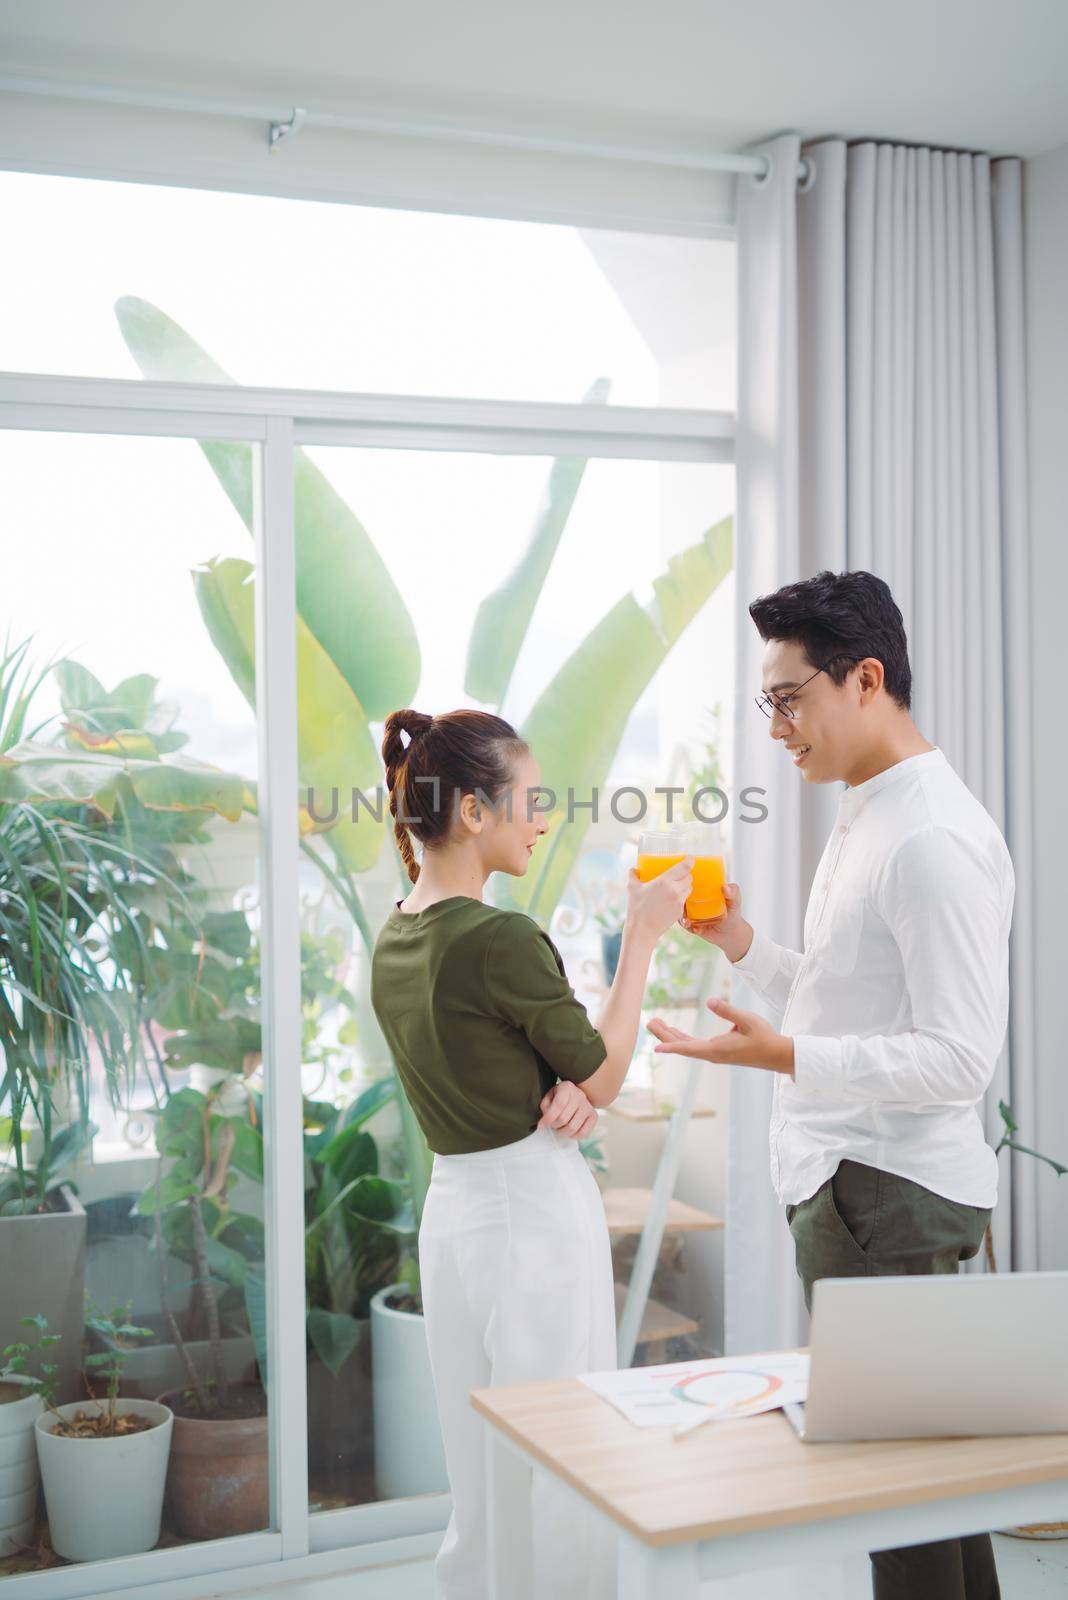 Beautiful young couple in office, using laptop